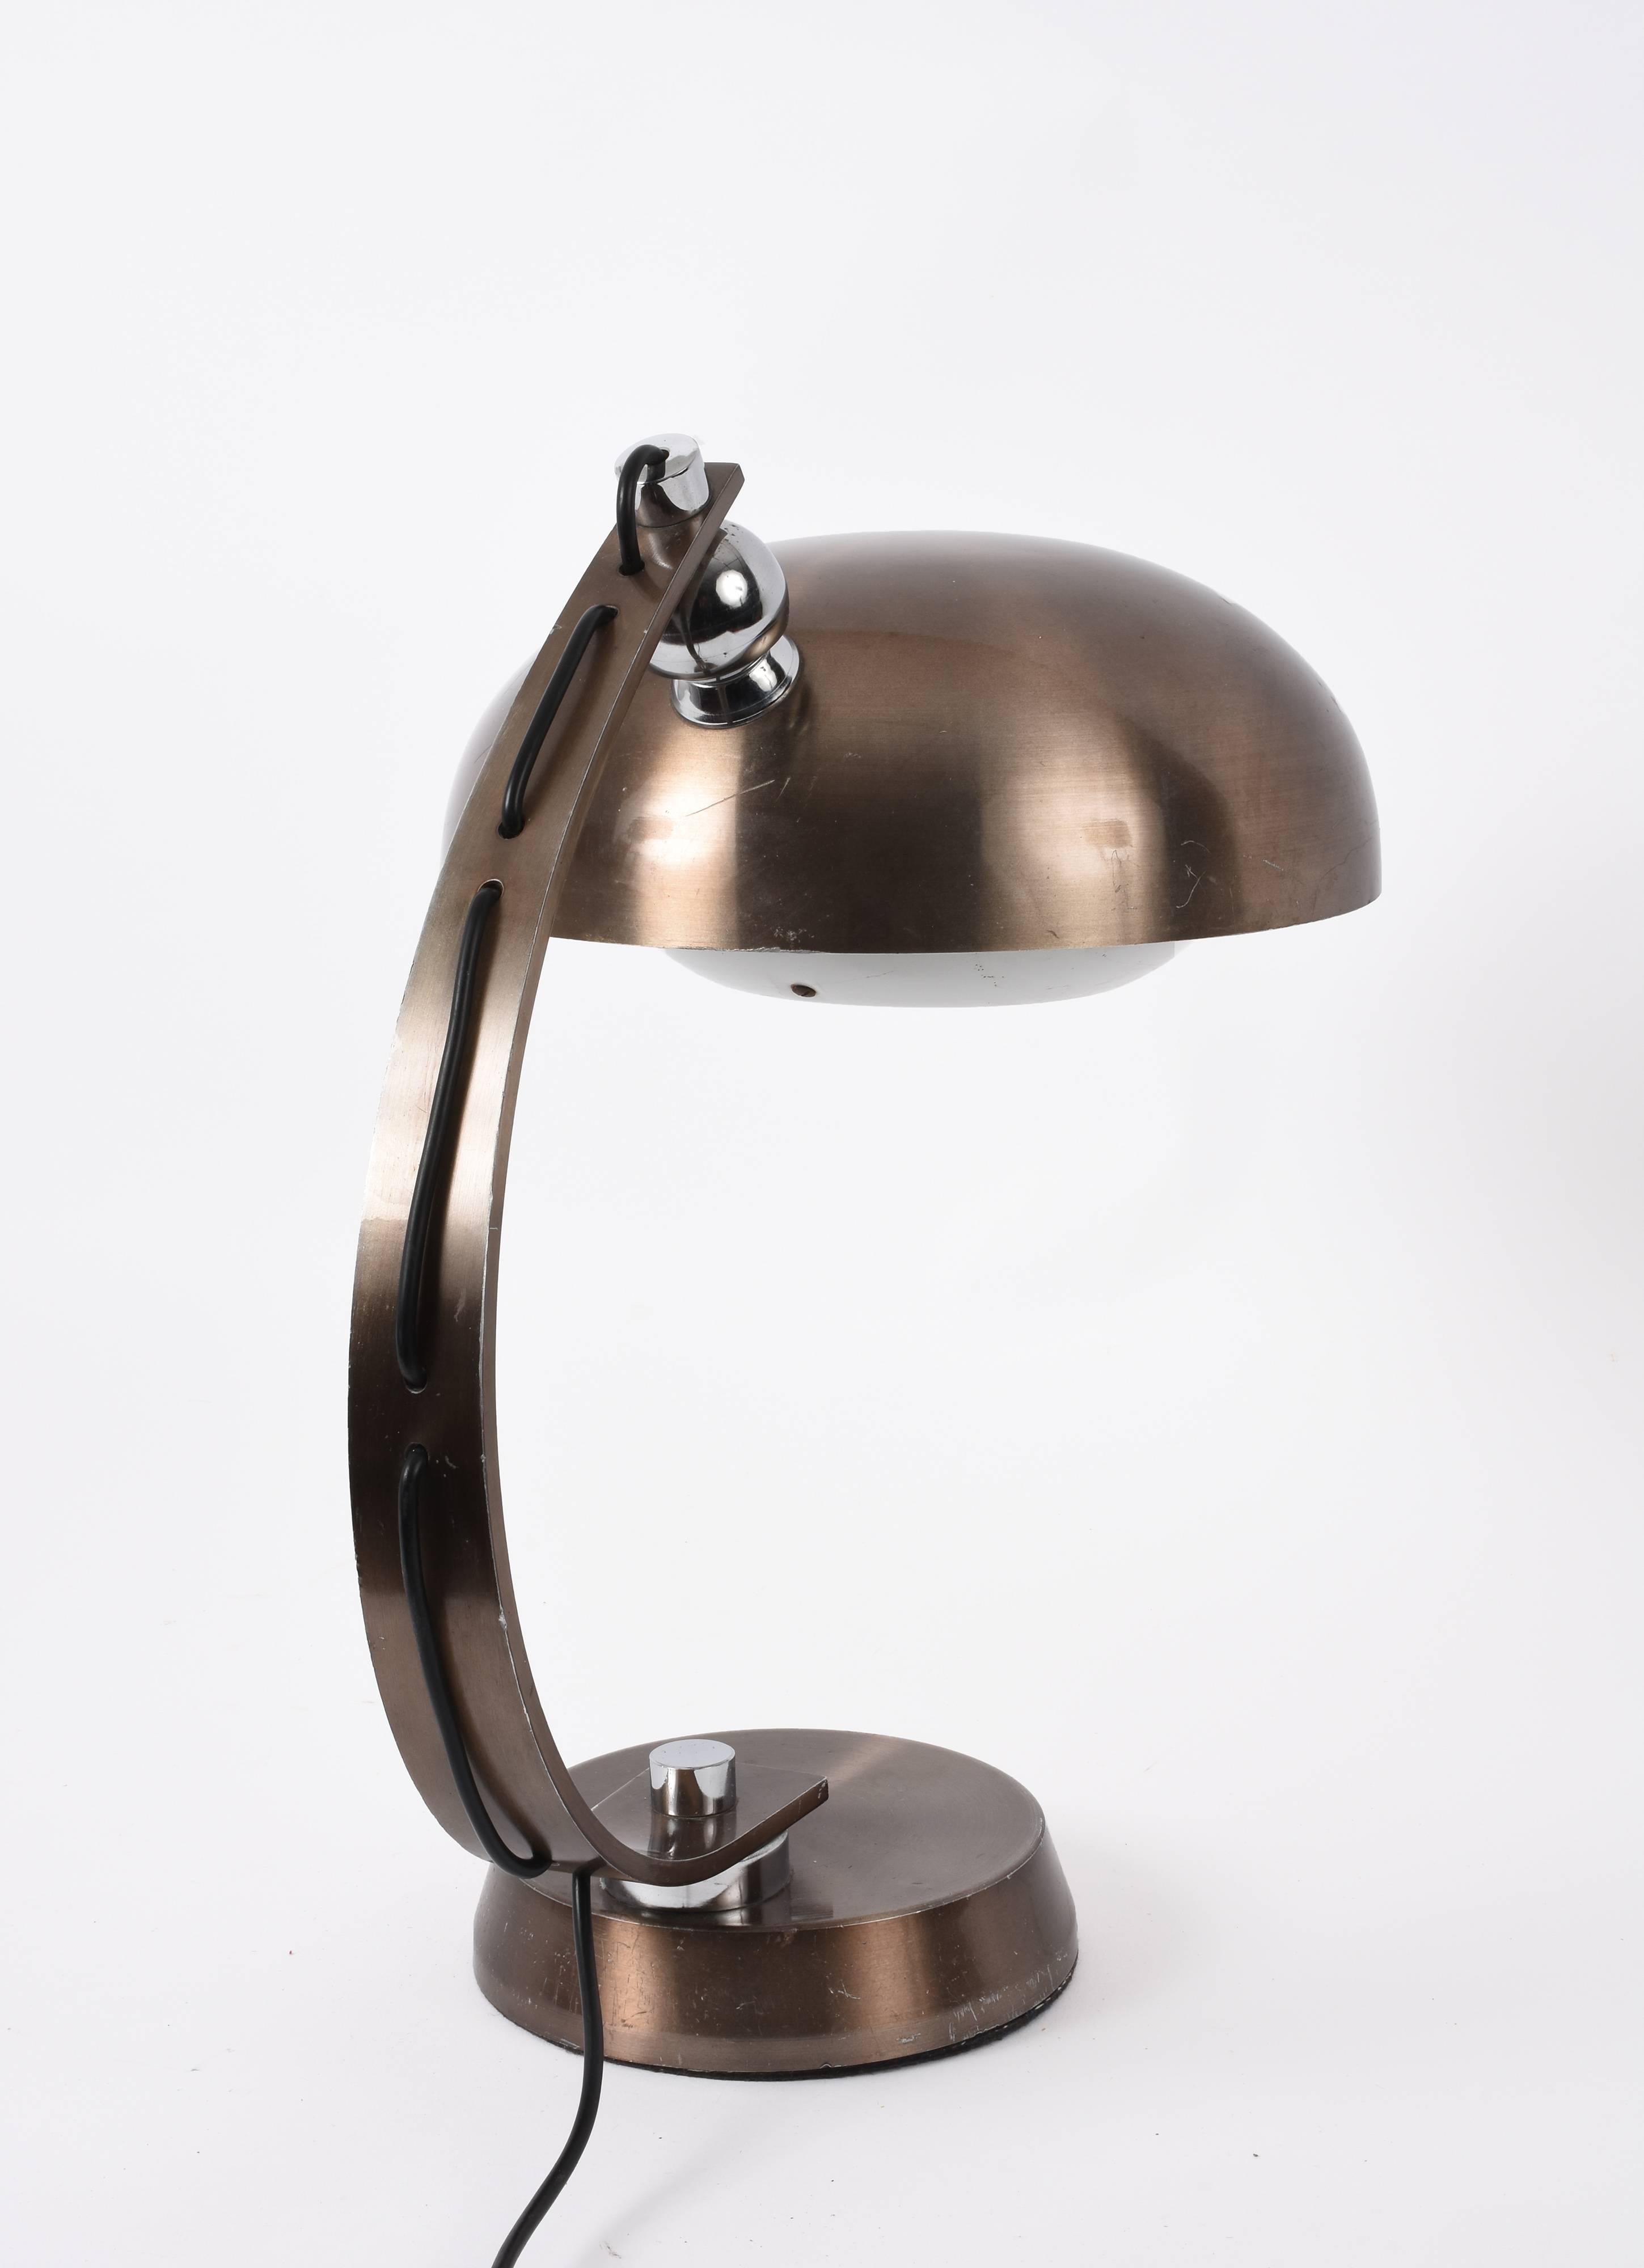 Mid-Century Modern Table Lamp in Brushed and Bronzed Aluminum 1970 Italian Attributed to Arredoluce